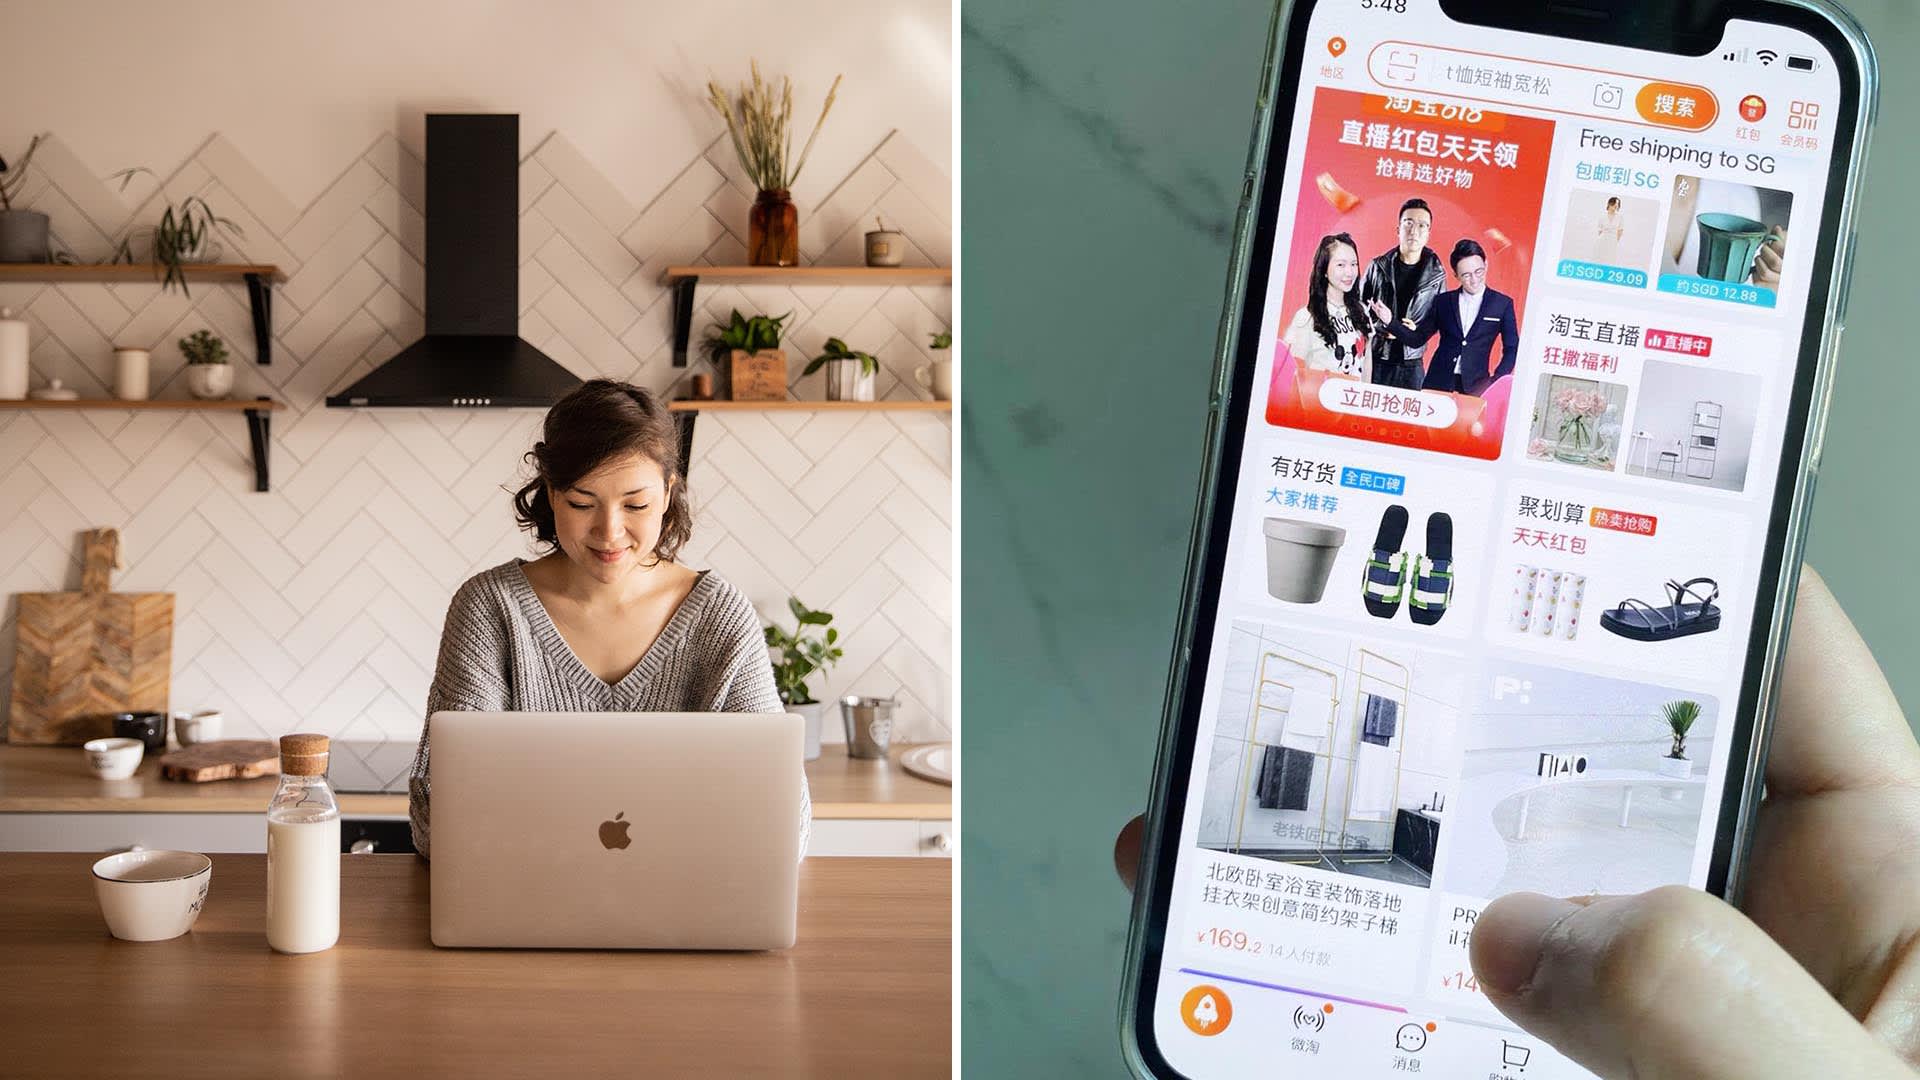 You Can Now Ship Bigger Items Directly From Taobao Without Much Hassle. Here's How